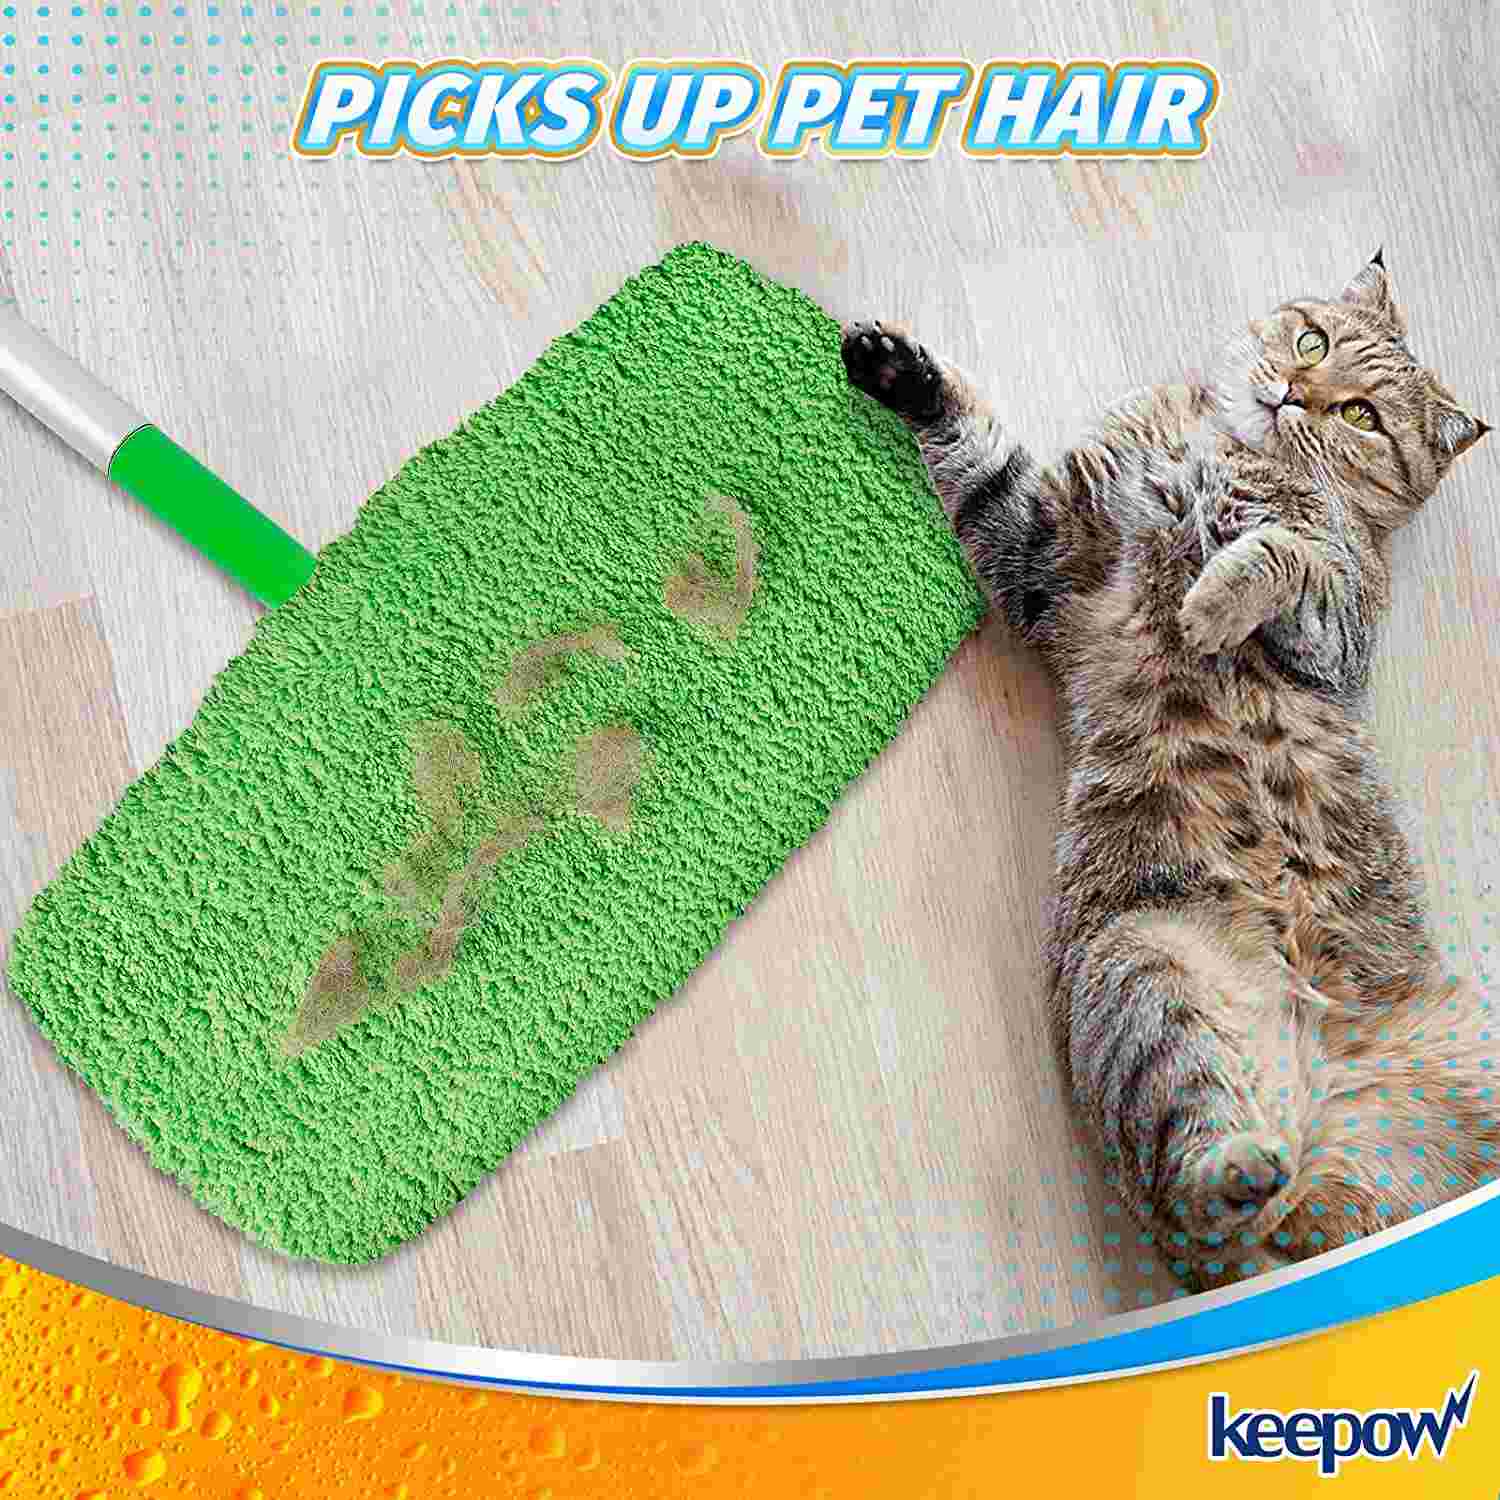 KEEPOW Washable Microfiber Wet Mopping Cloth Refills for Surface/Hardwood Floor Cleaning